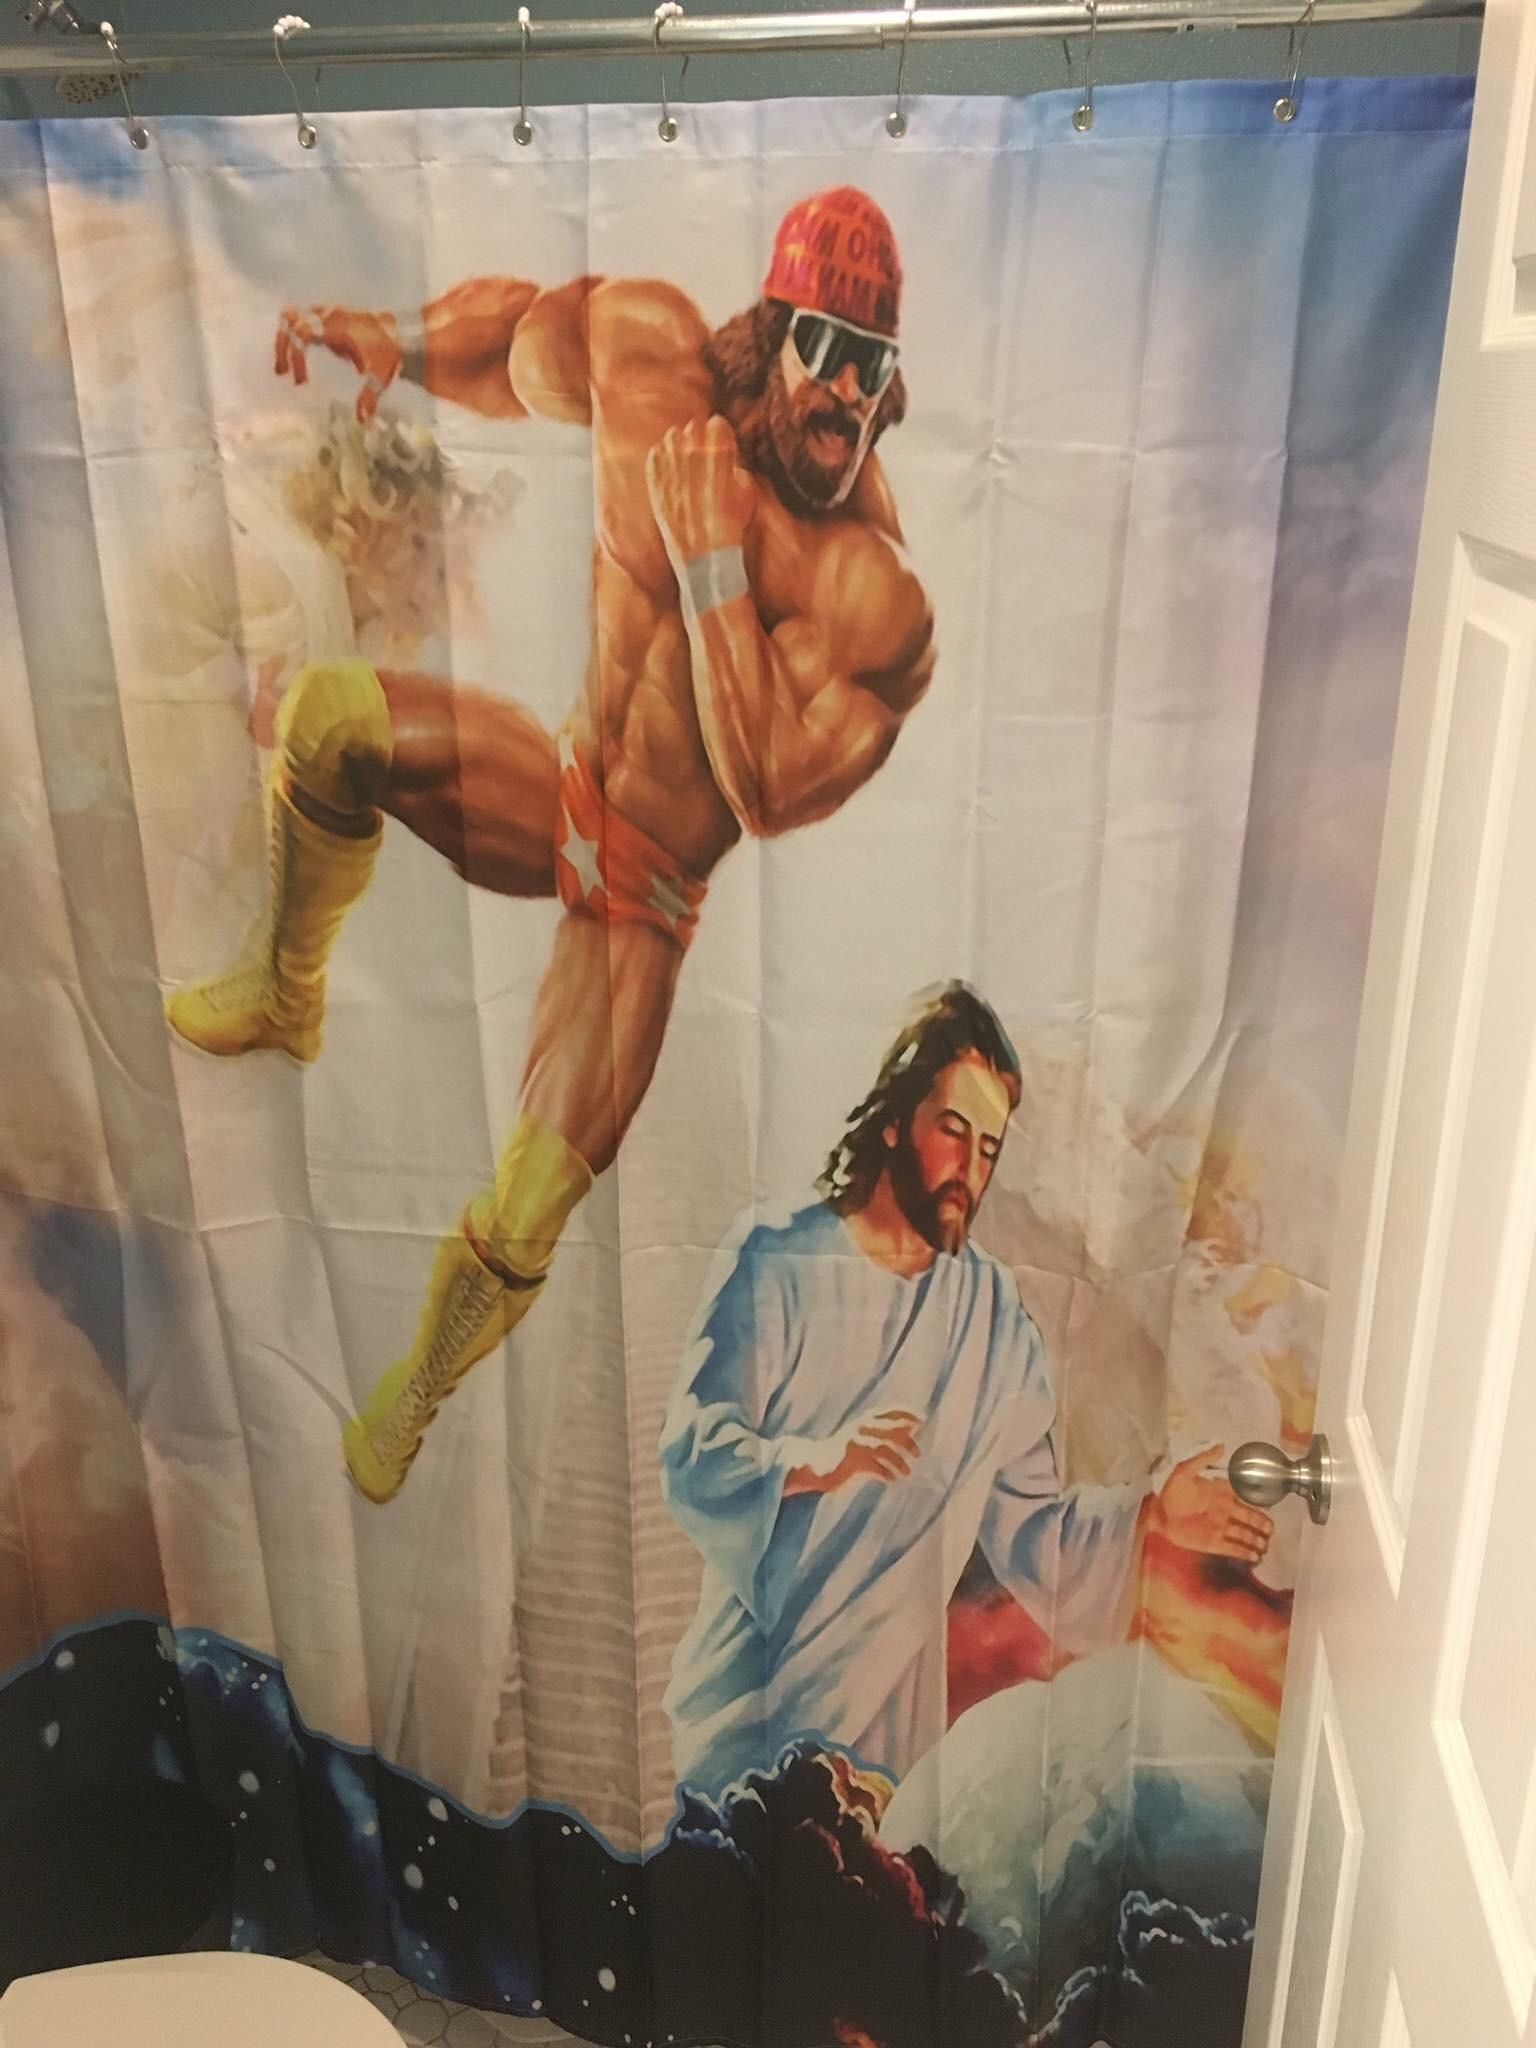 Jesus about to get body slammed on this shower curtain